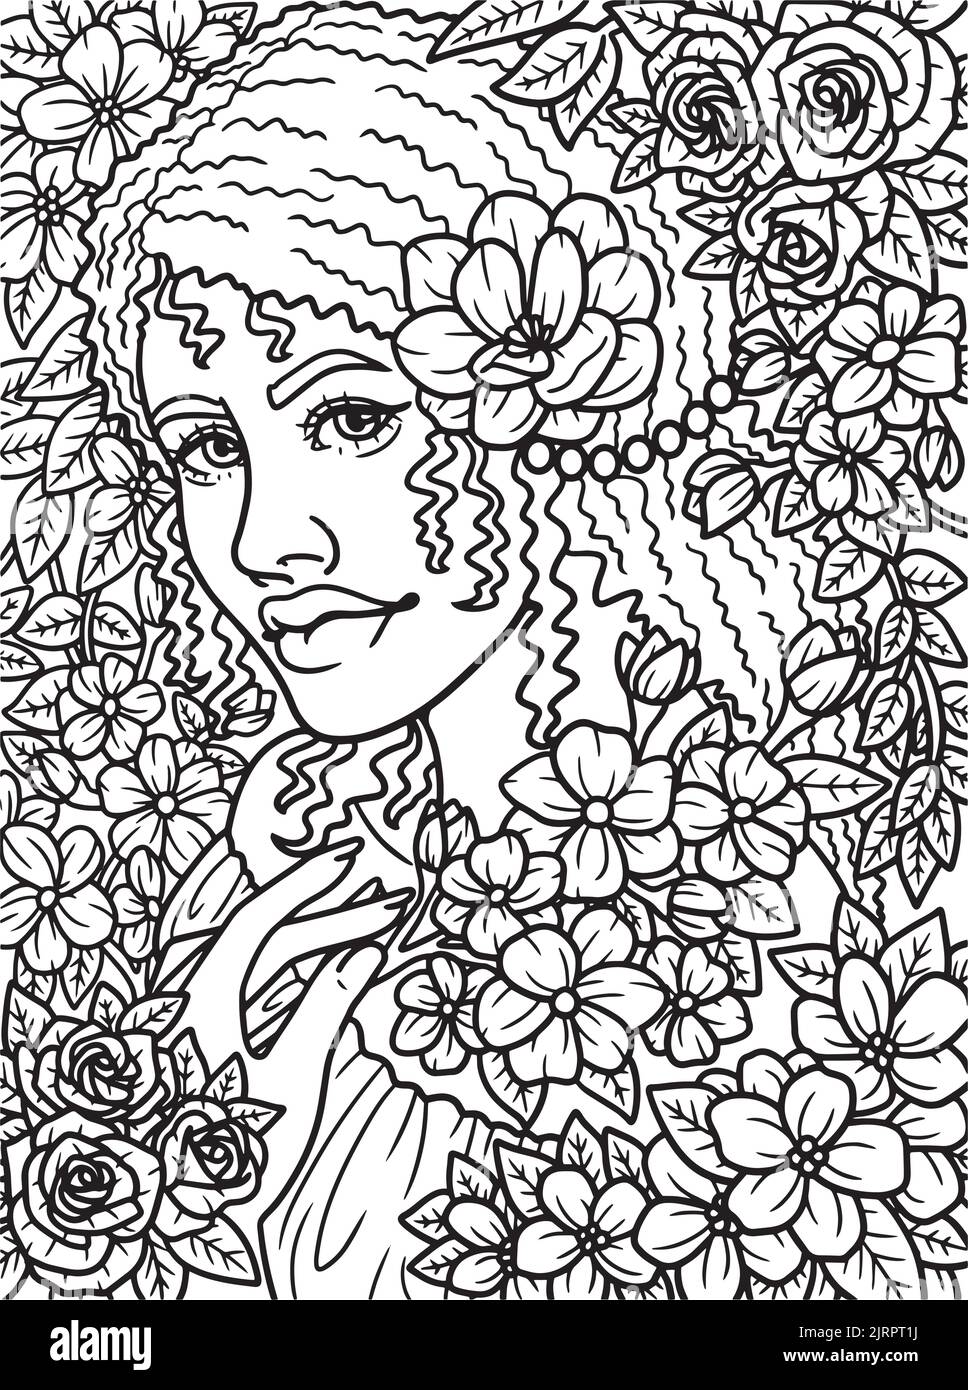 Afro American Cute Flower Girl Coloring Page Stock Vector Image & Art ...